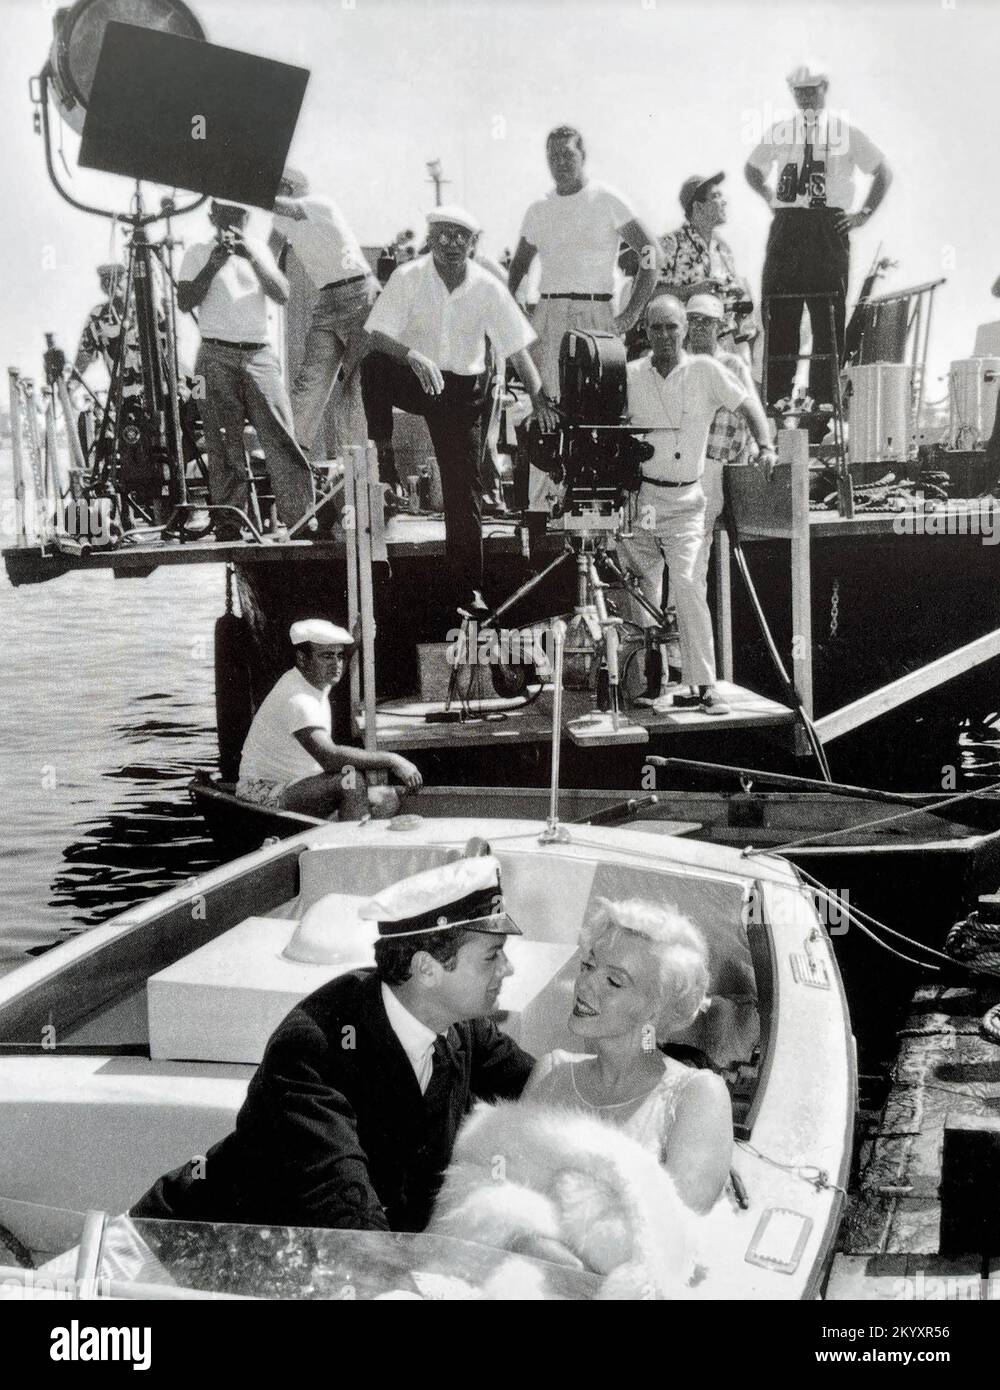 SOME LIKE IT HOT 1959 United Artists film with Marilyn Monroe and Tony Curtis, directed by Billy Wilder Stock Photo